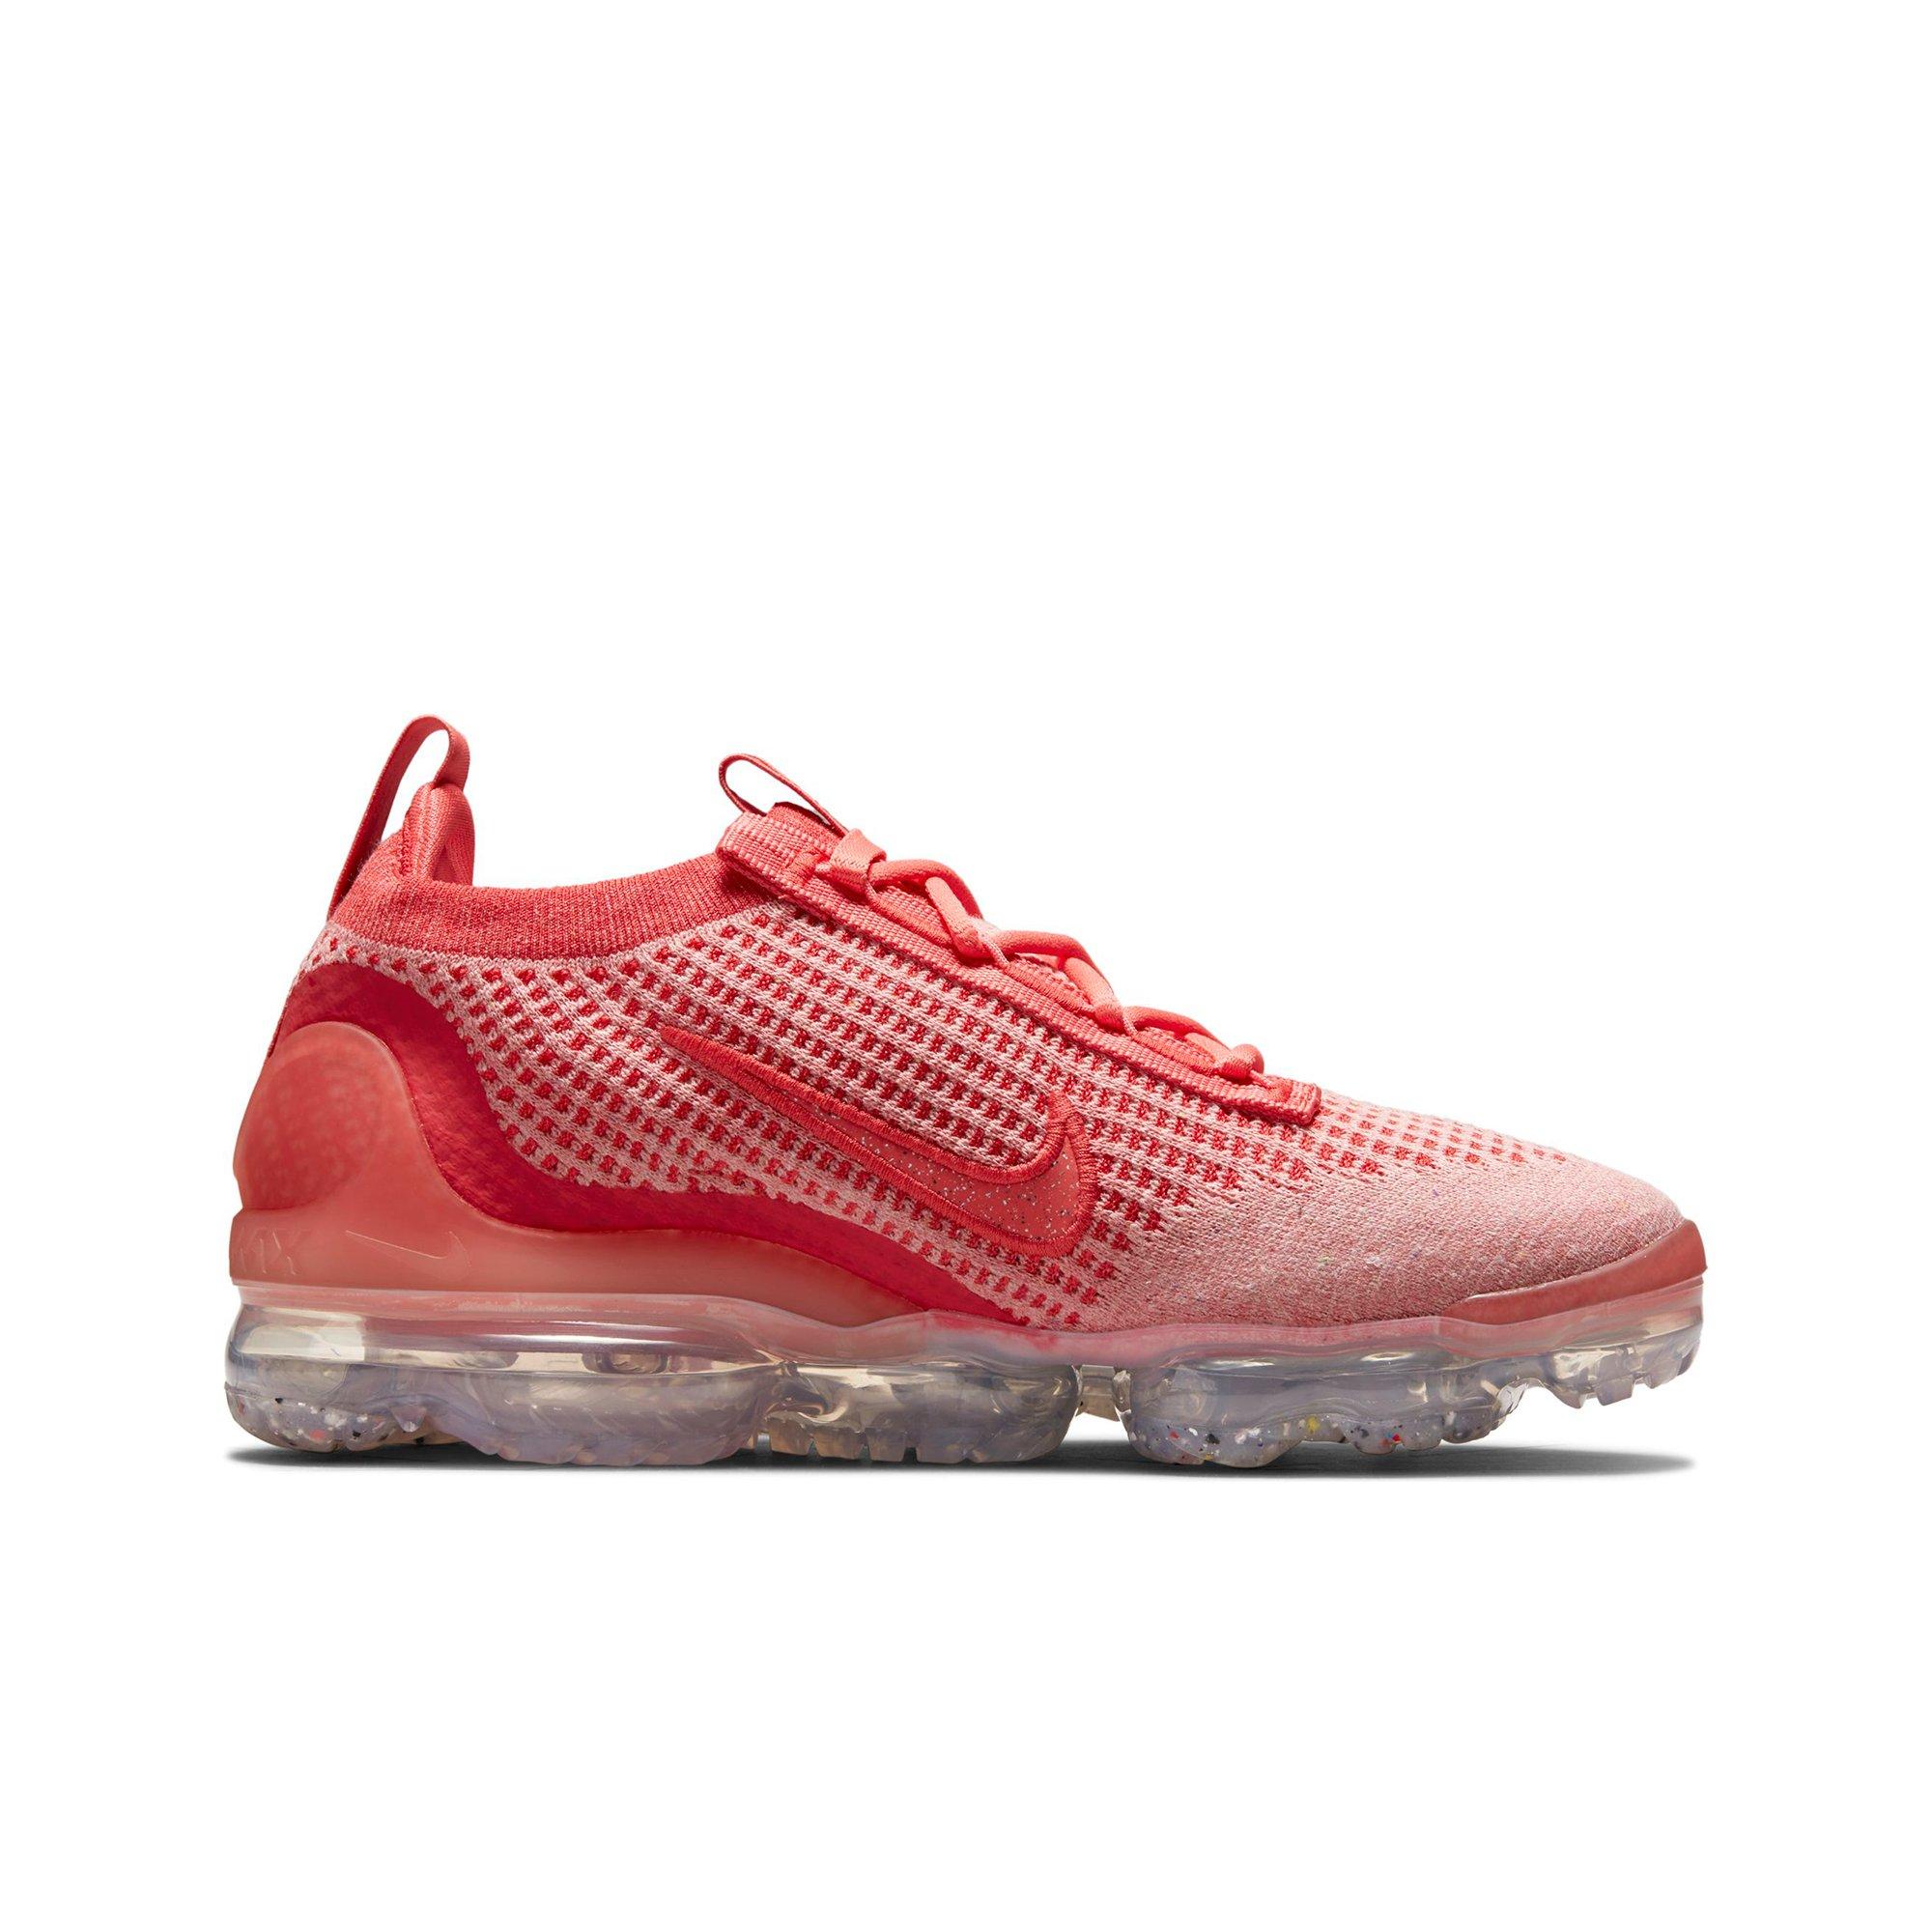 vapormax pink and red